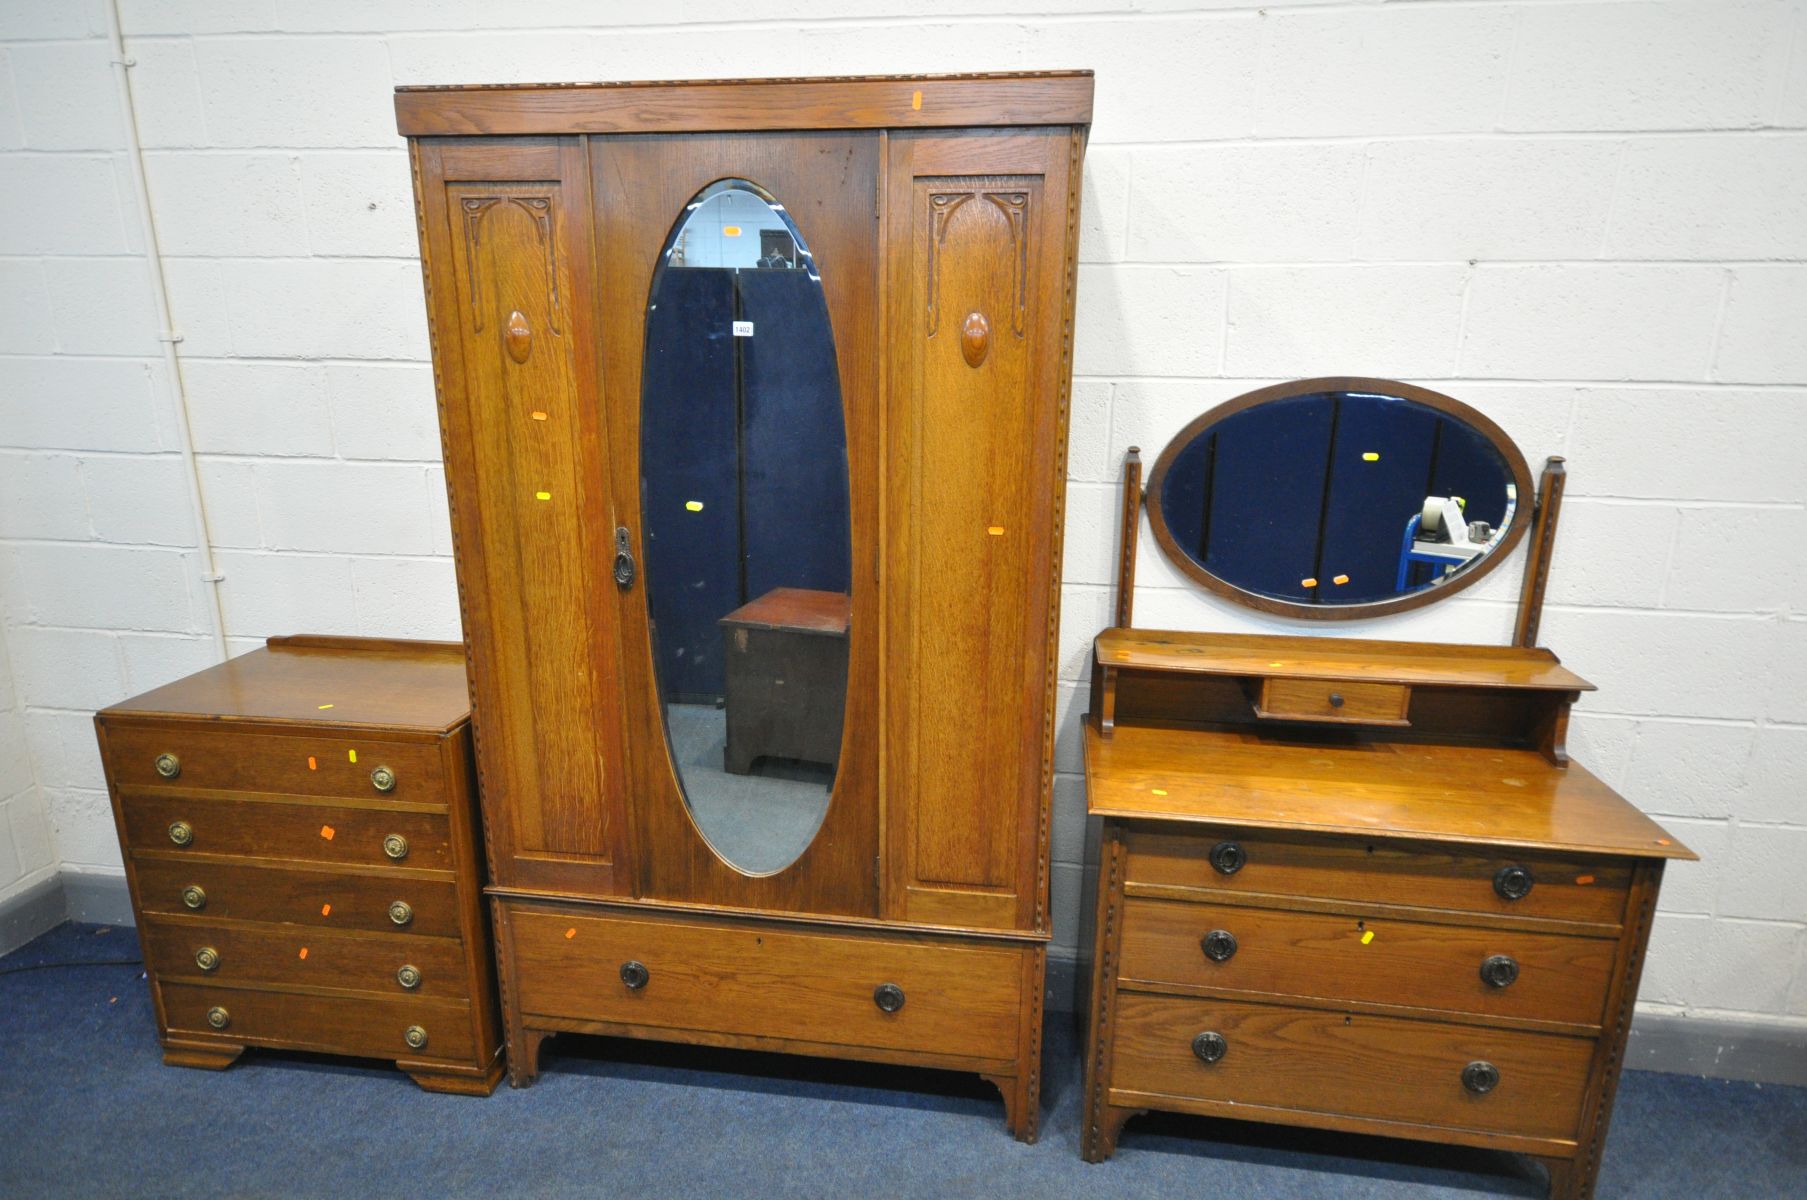 AN EARLY TO MID 20TH CENTURY OAK BEDROOM SUITE, comprising a single mirror door wardrobe, with a